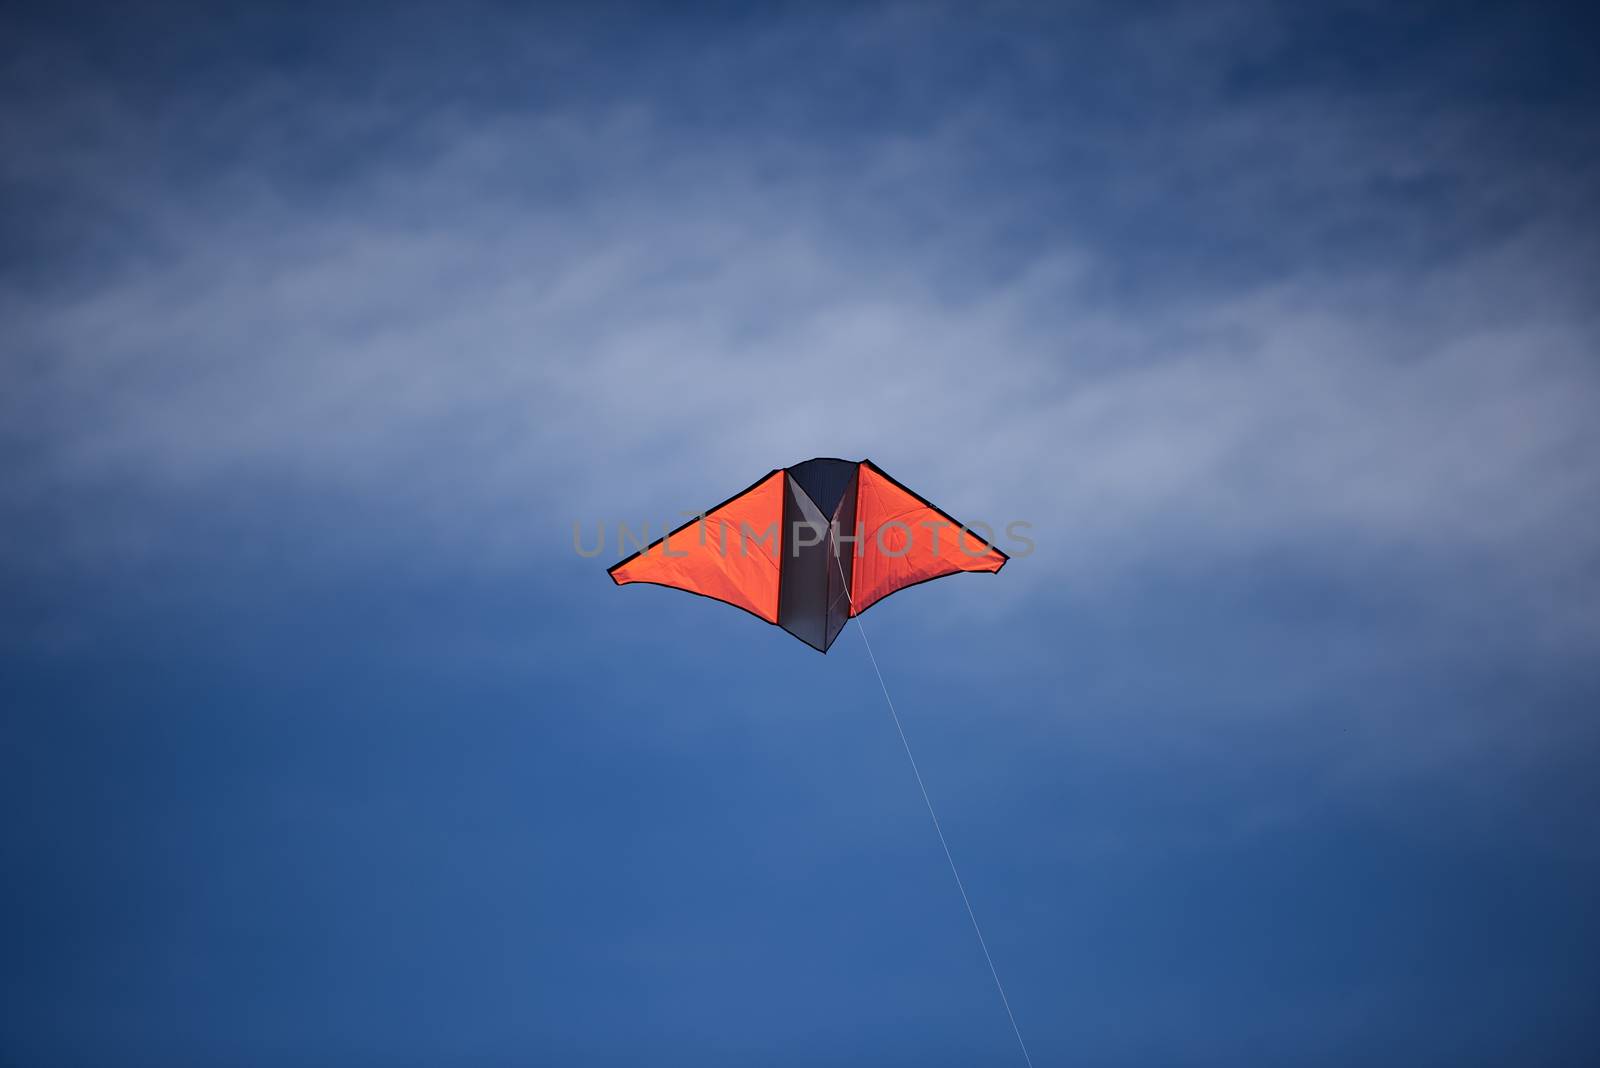 A bright colored kite flying high against a blue sky